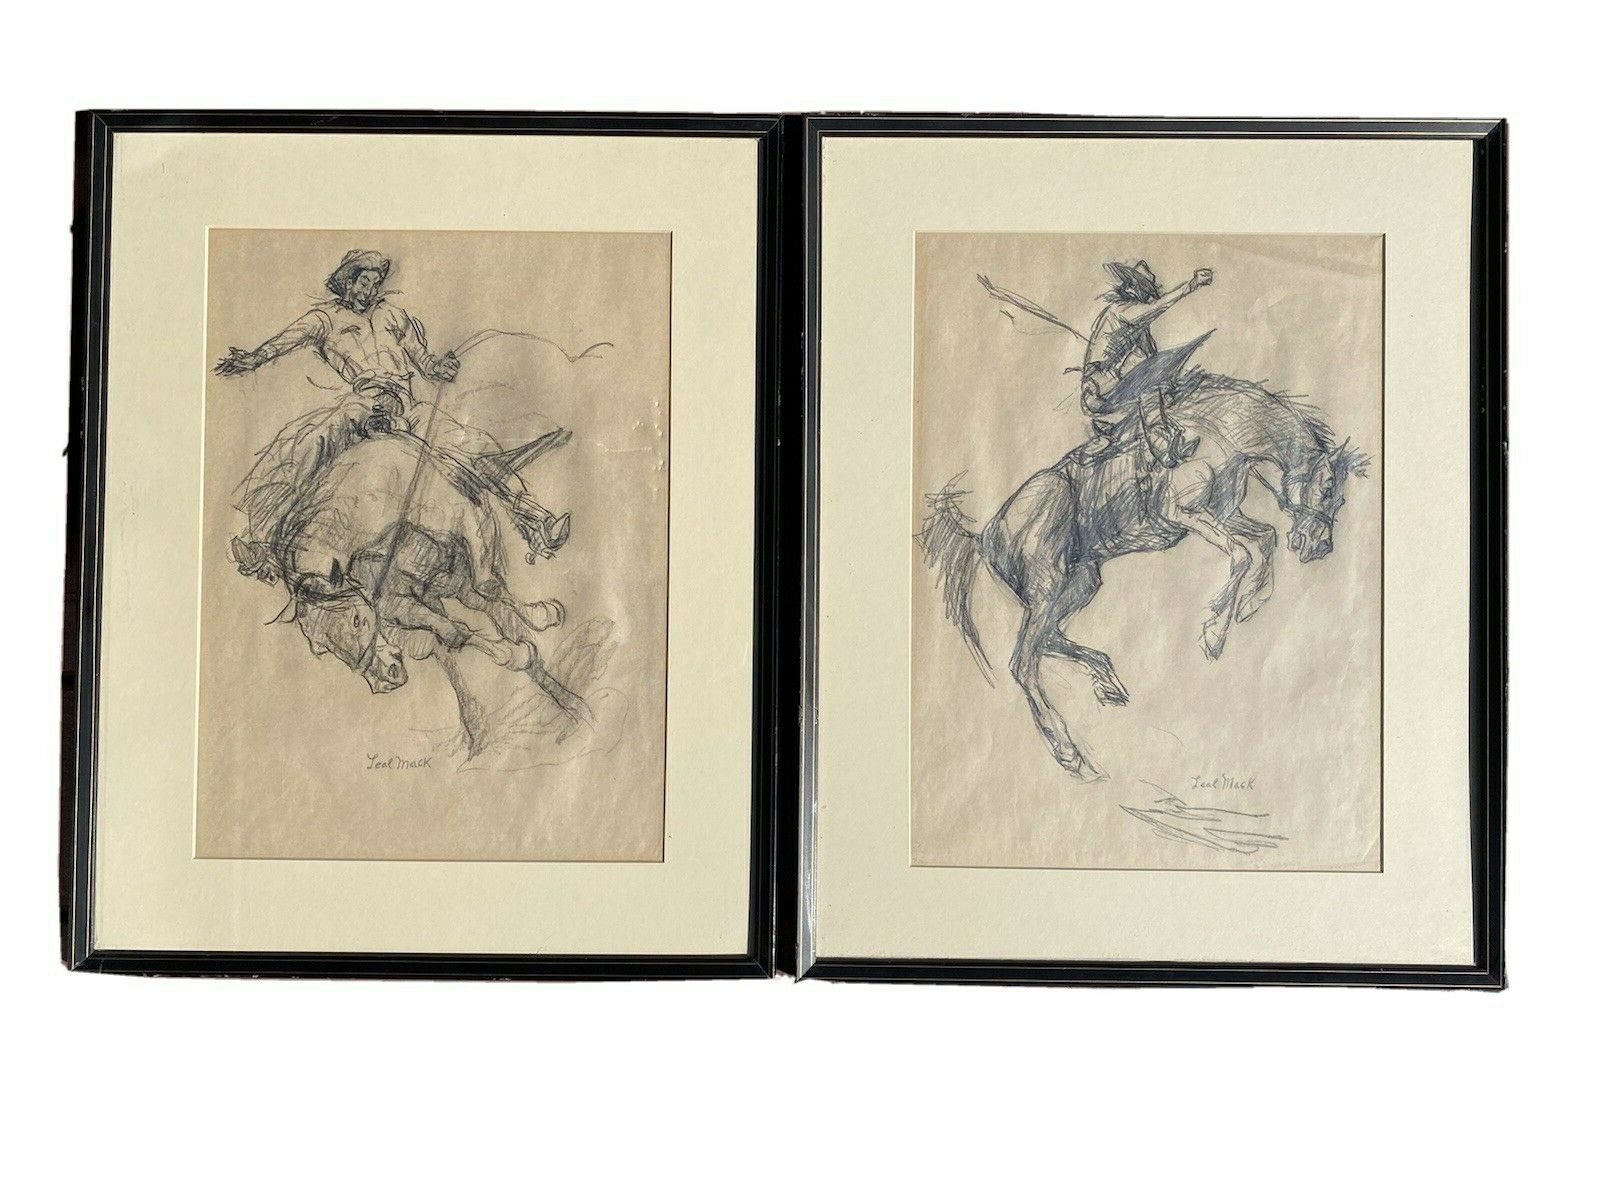 Pair Leal Mack American (1892-1962) Charcoal Bucking Bronco Western Drawings. Leal Mack was a painter and a magazine illustrator born in Titusville, Pennsylvania. He worked for The Saturday Evening Post, Harper's, Country Gentleman and Youth's Companion. He relocated to Taos, New Mexico in 1944 where his works centered on Western Cowboy Themes. These two signed charcoal drawings are in good condition other than the one on the left has some indentation on the paper. The framed measurement is 16.75" x 20.75" each ~ $165